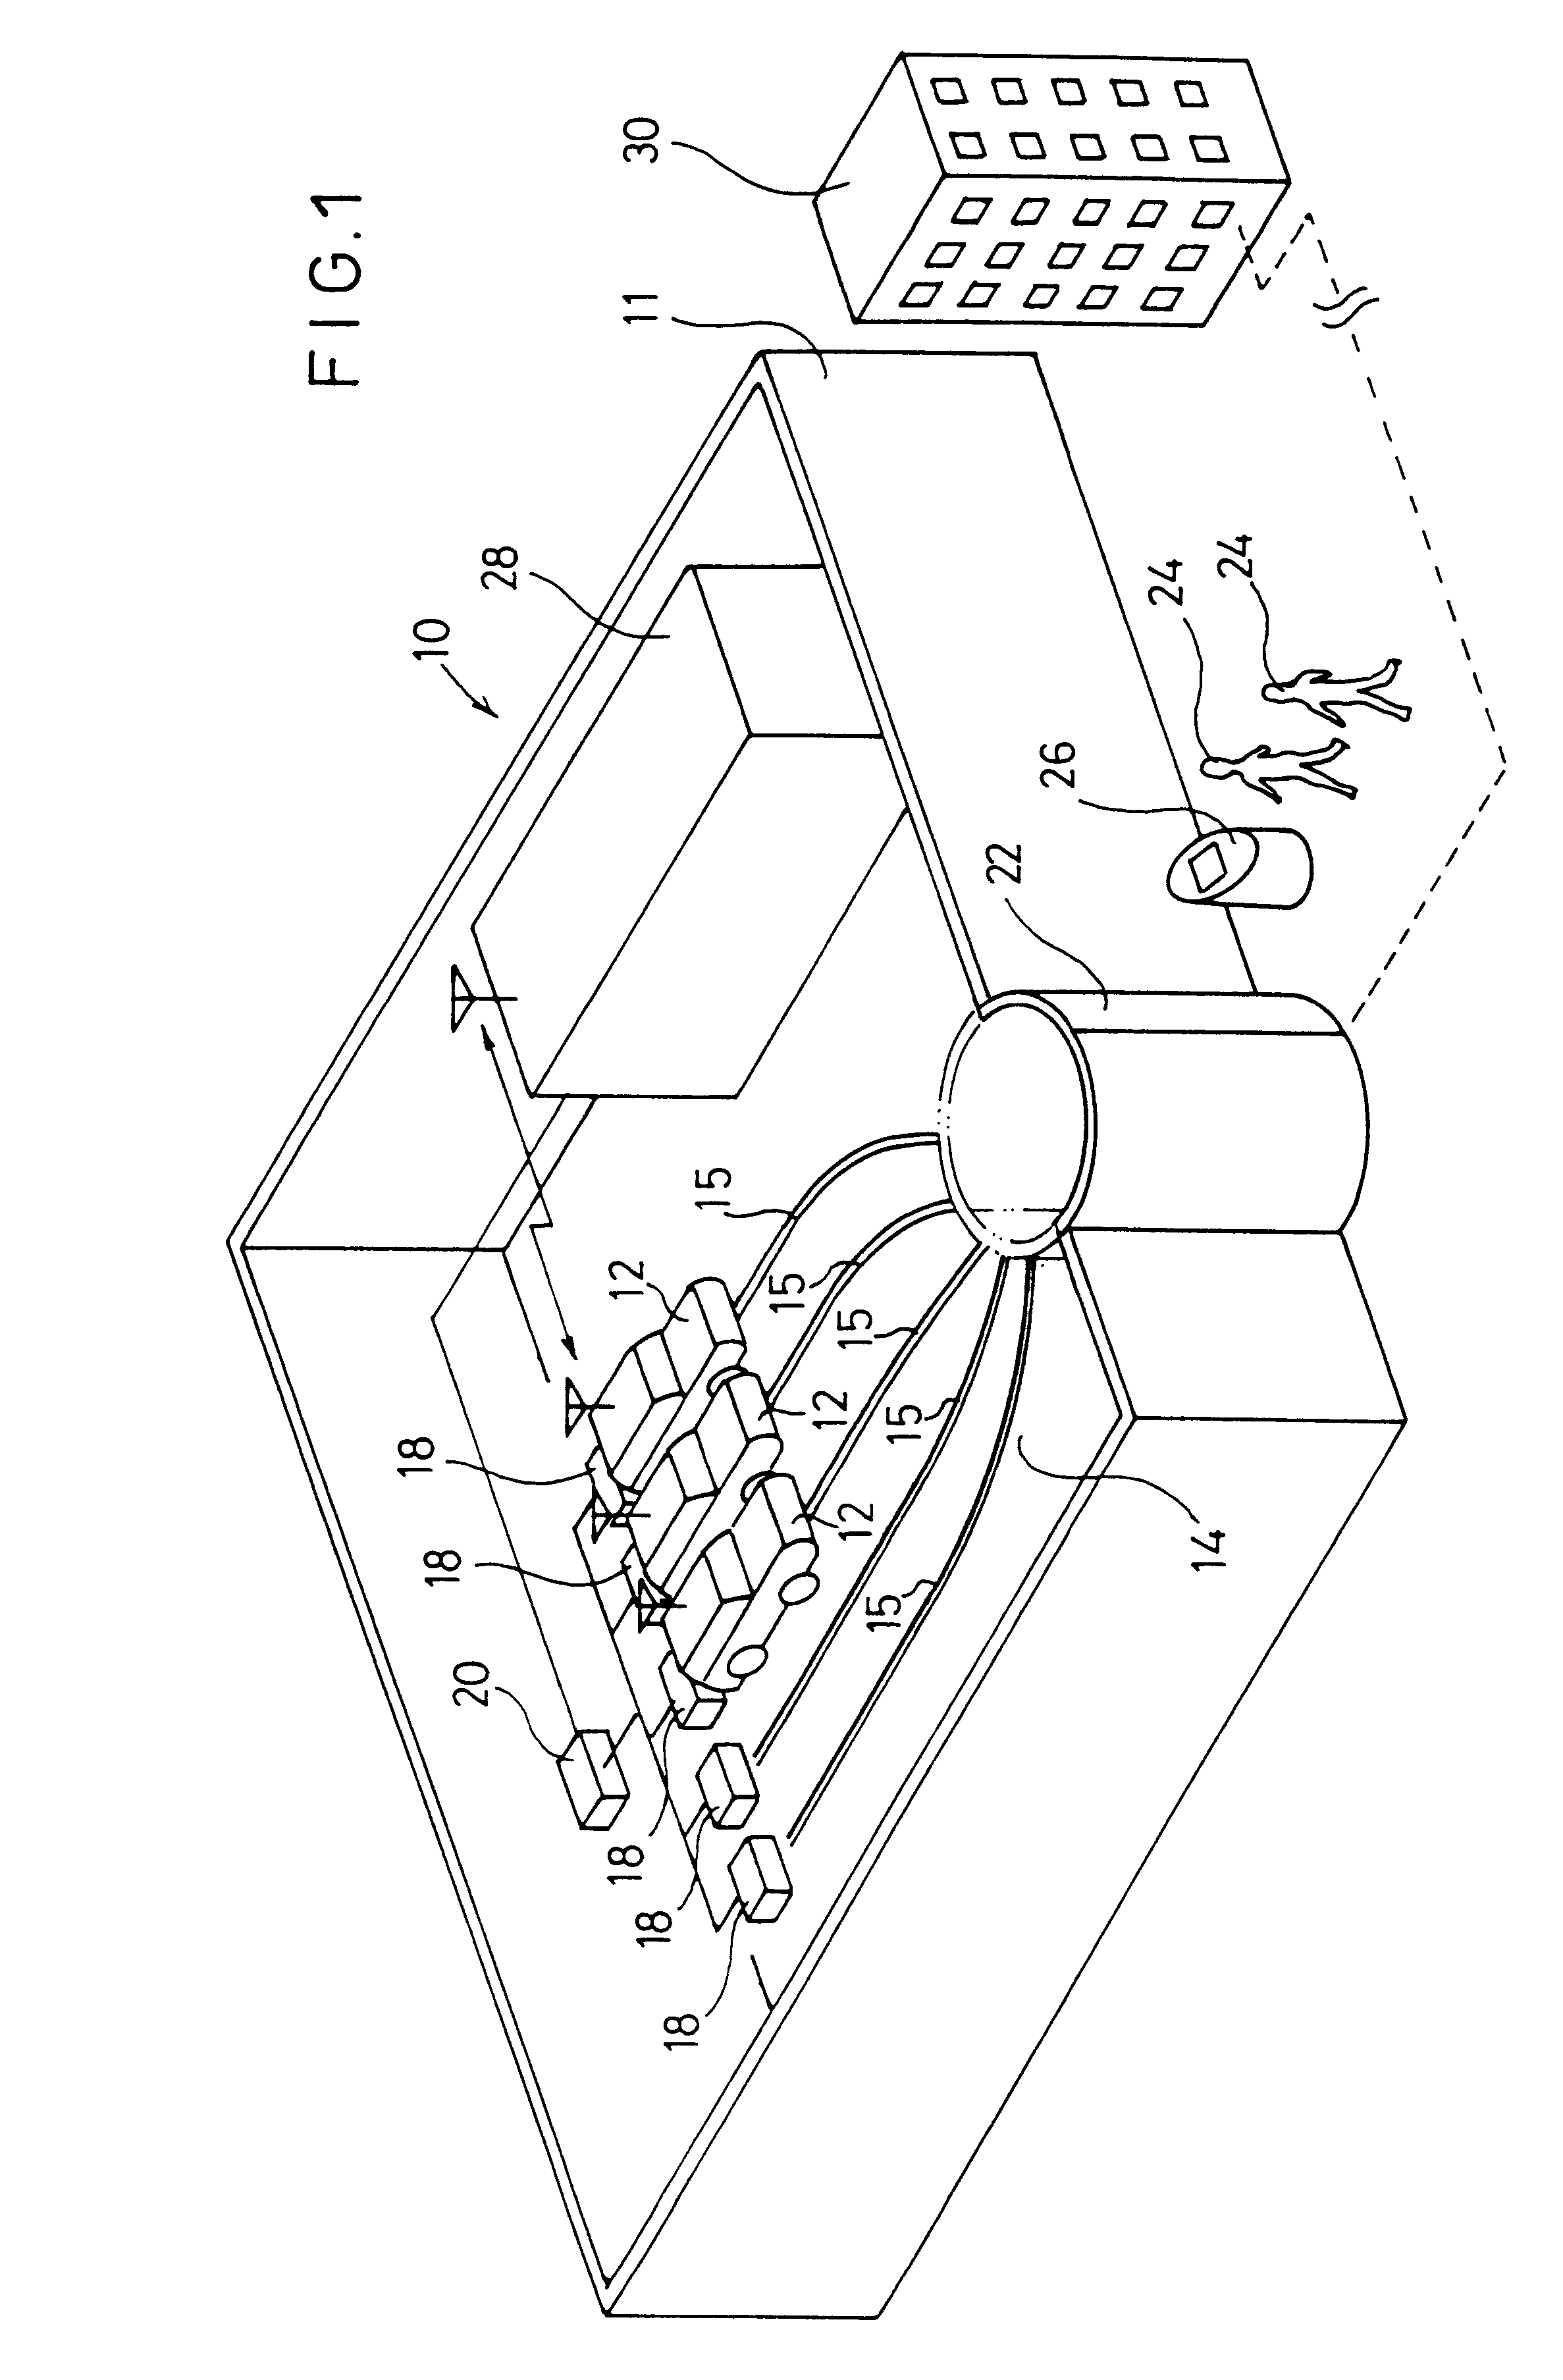 Electric vehicle sharing system